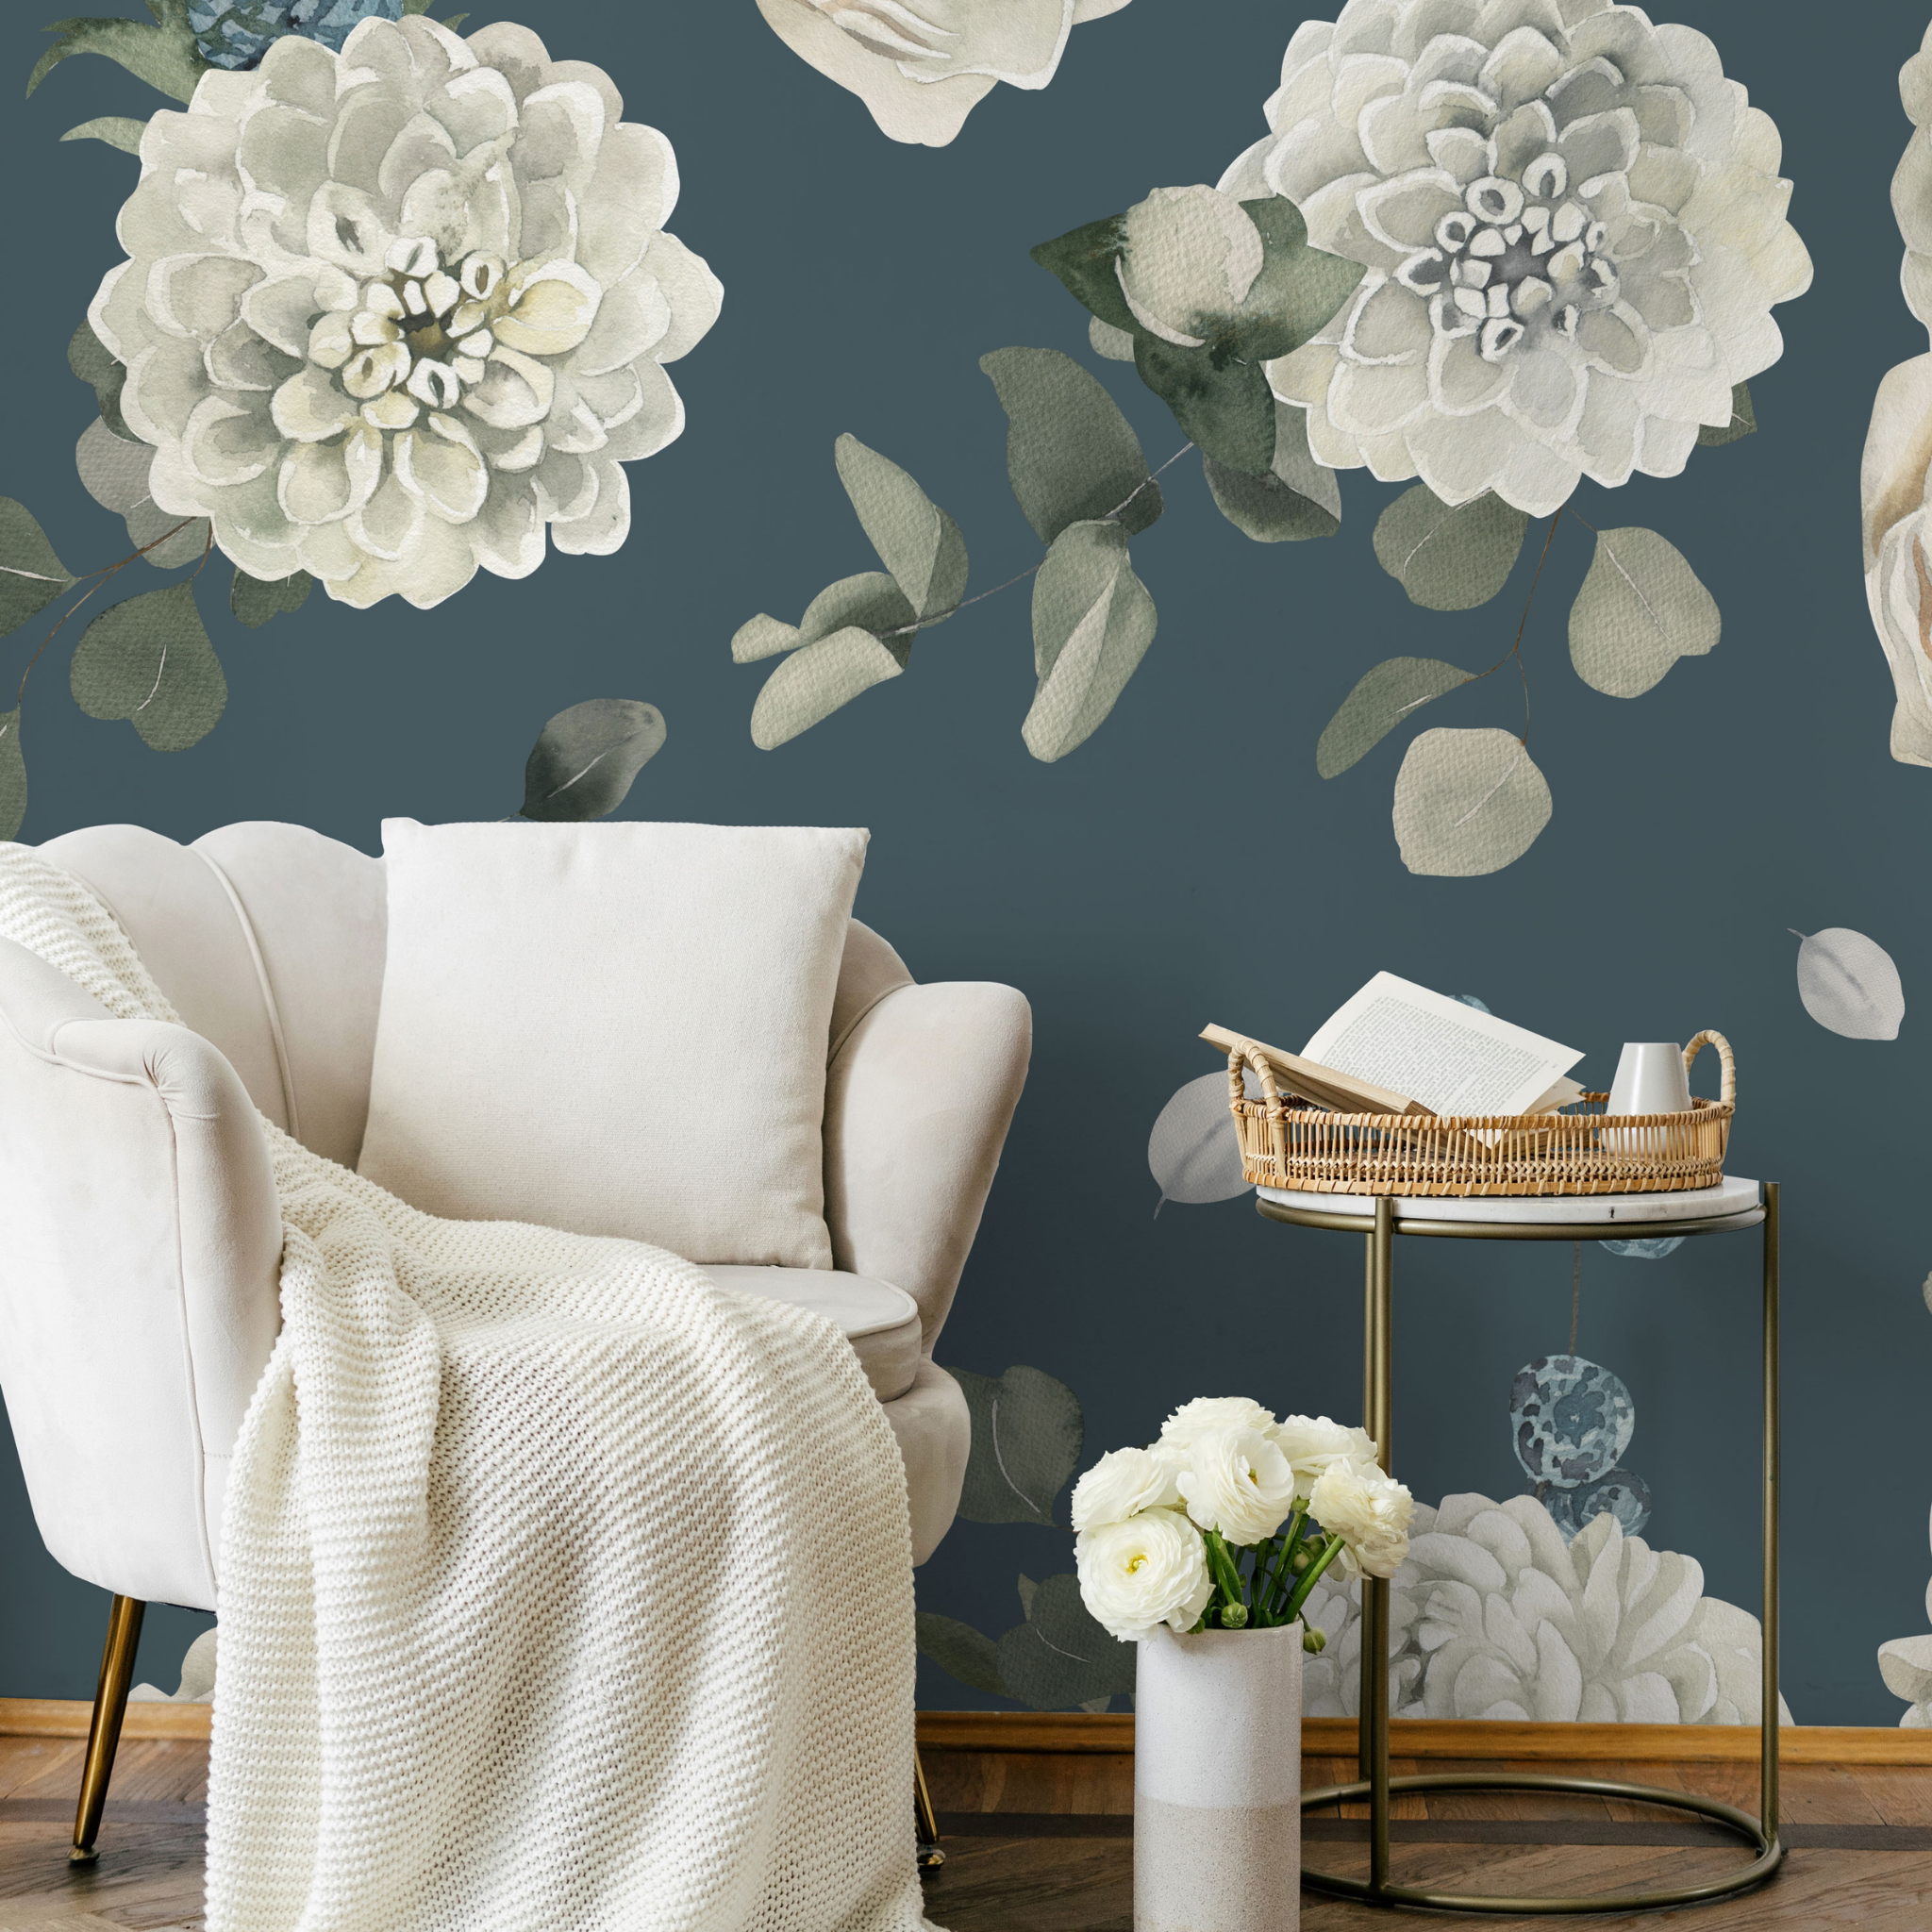 "Wall Blush's Forget Me Not Wallpaper in elegant living room setup emphasizing the floral pattern and cozy ambiance."